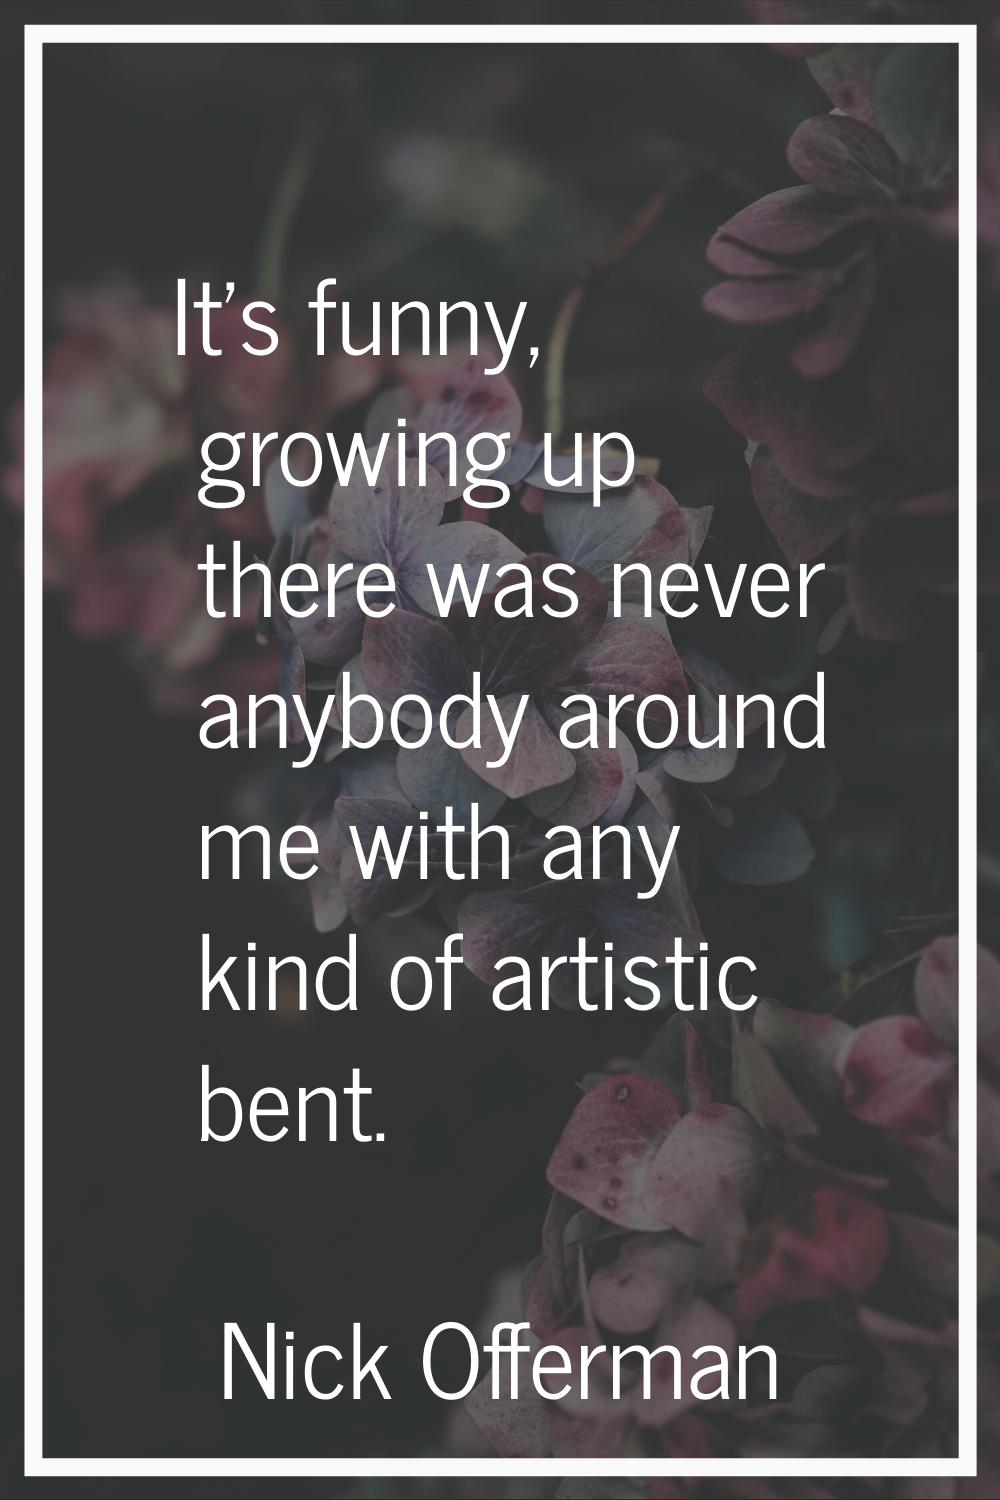 It's funny, growing up there was never anybody around me with any kind of artistic bent.